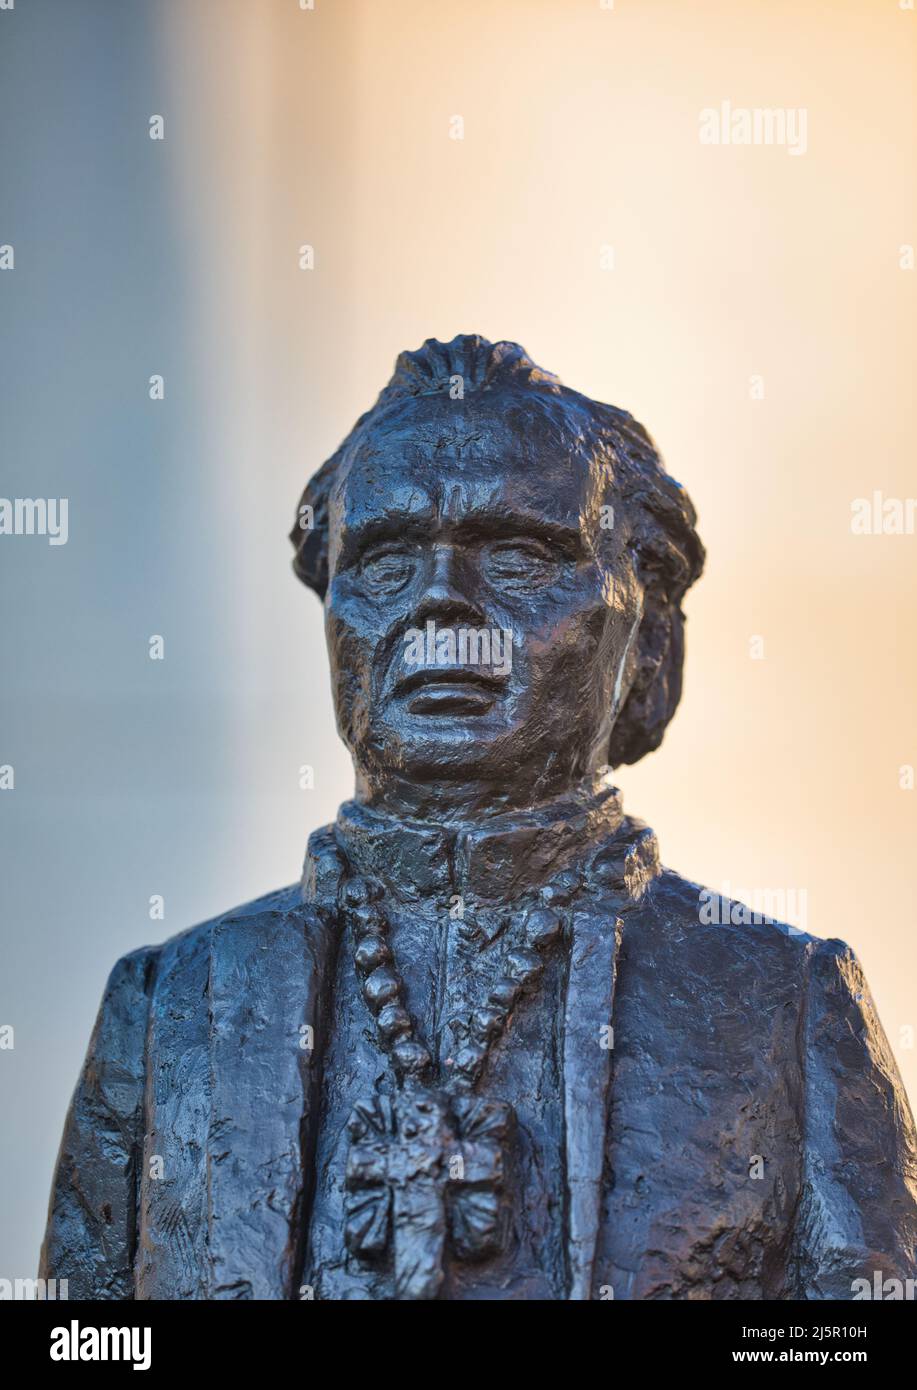 Statue of Nathan Soderblom Swedish Clergyman and Nobel Peace Prize Laureate by Bror Hjorth, Uppsala, Uppland, Sweden Stock Photo